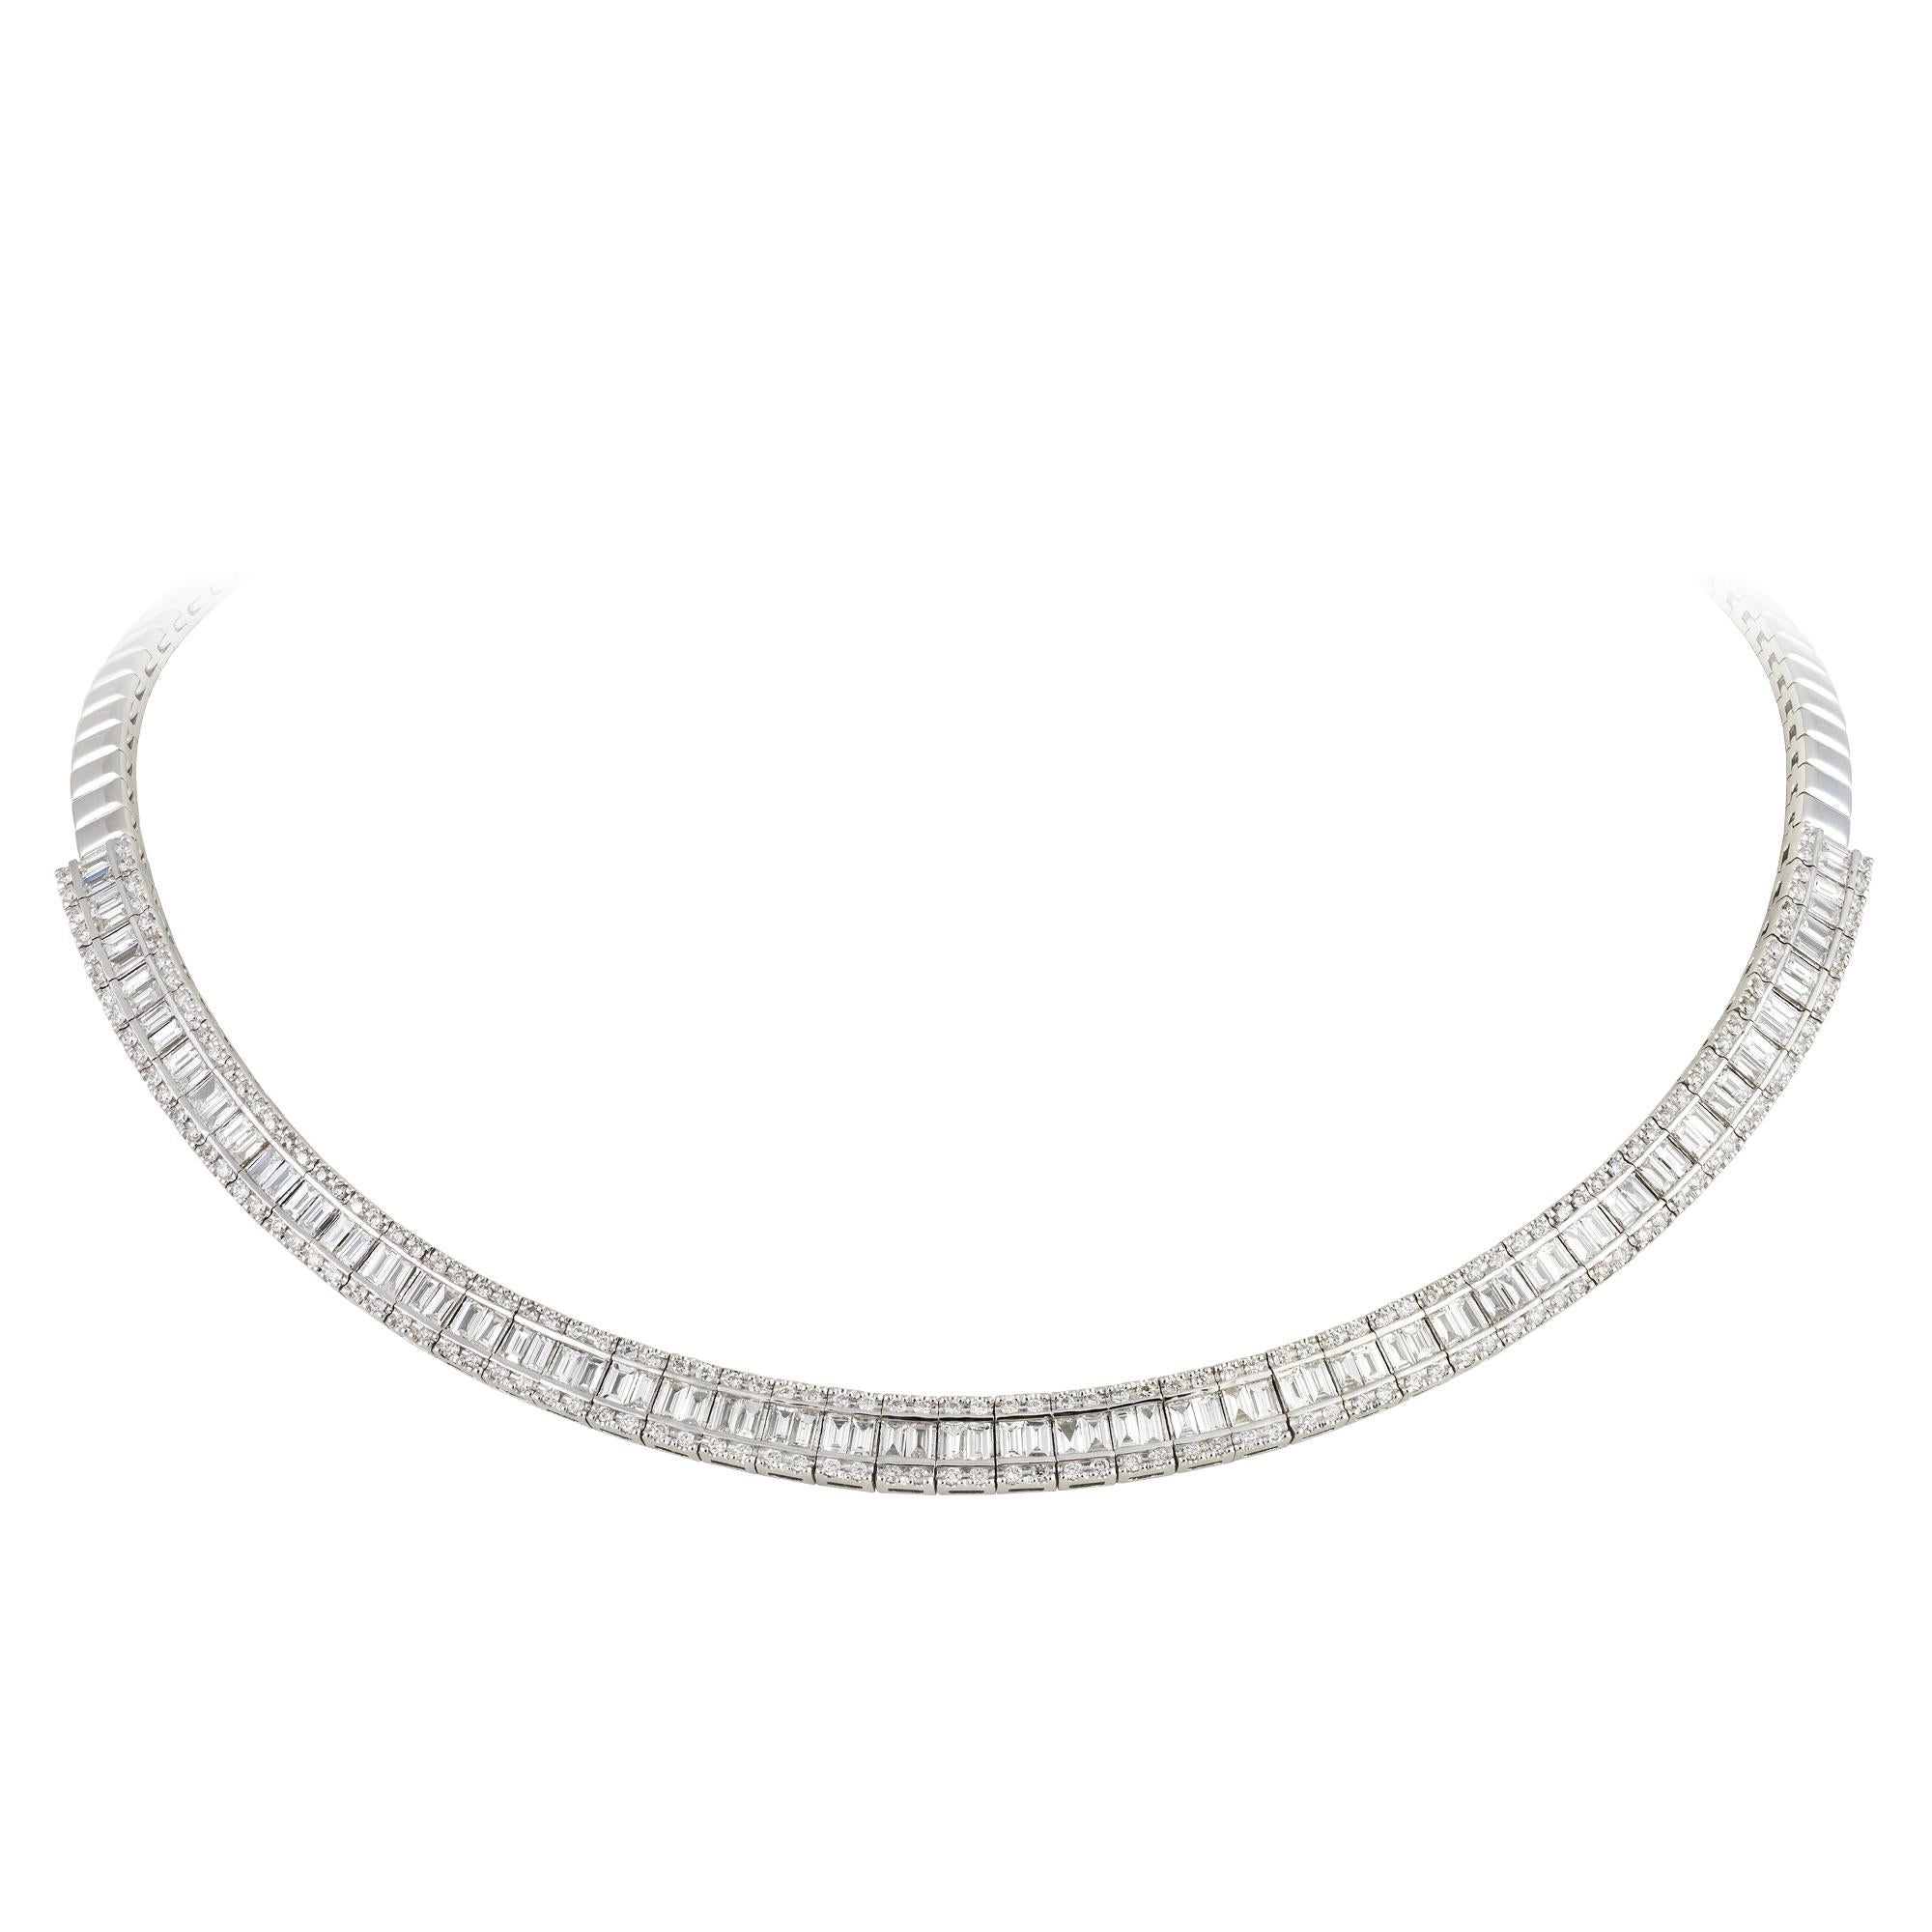 Modern Unique Choker White Gold 18K Necklace Diamond for Her For Sale